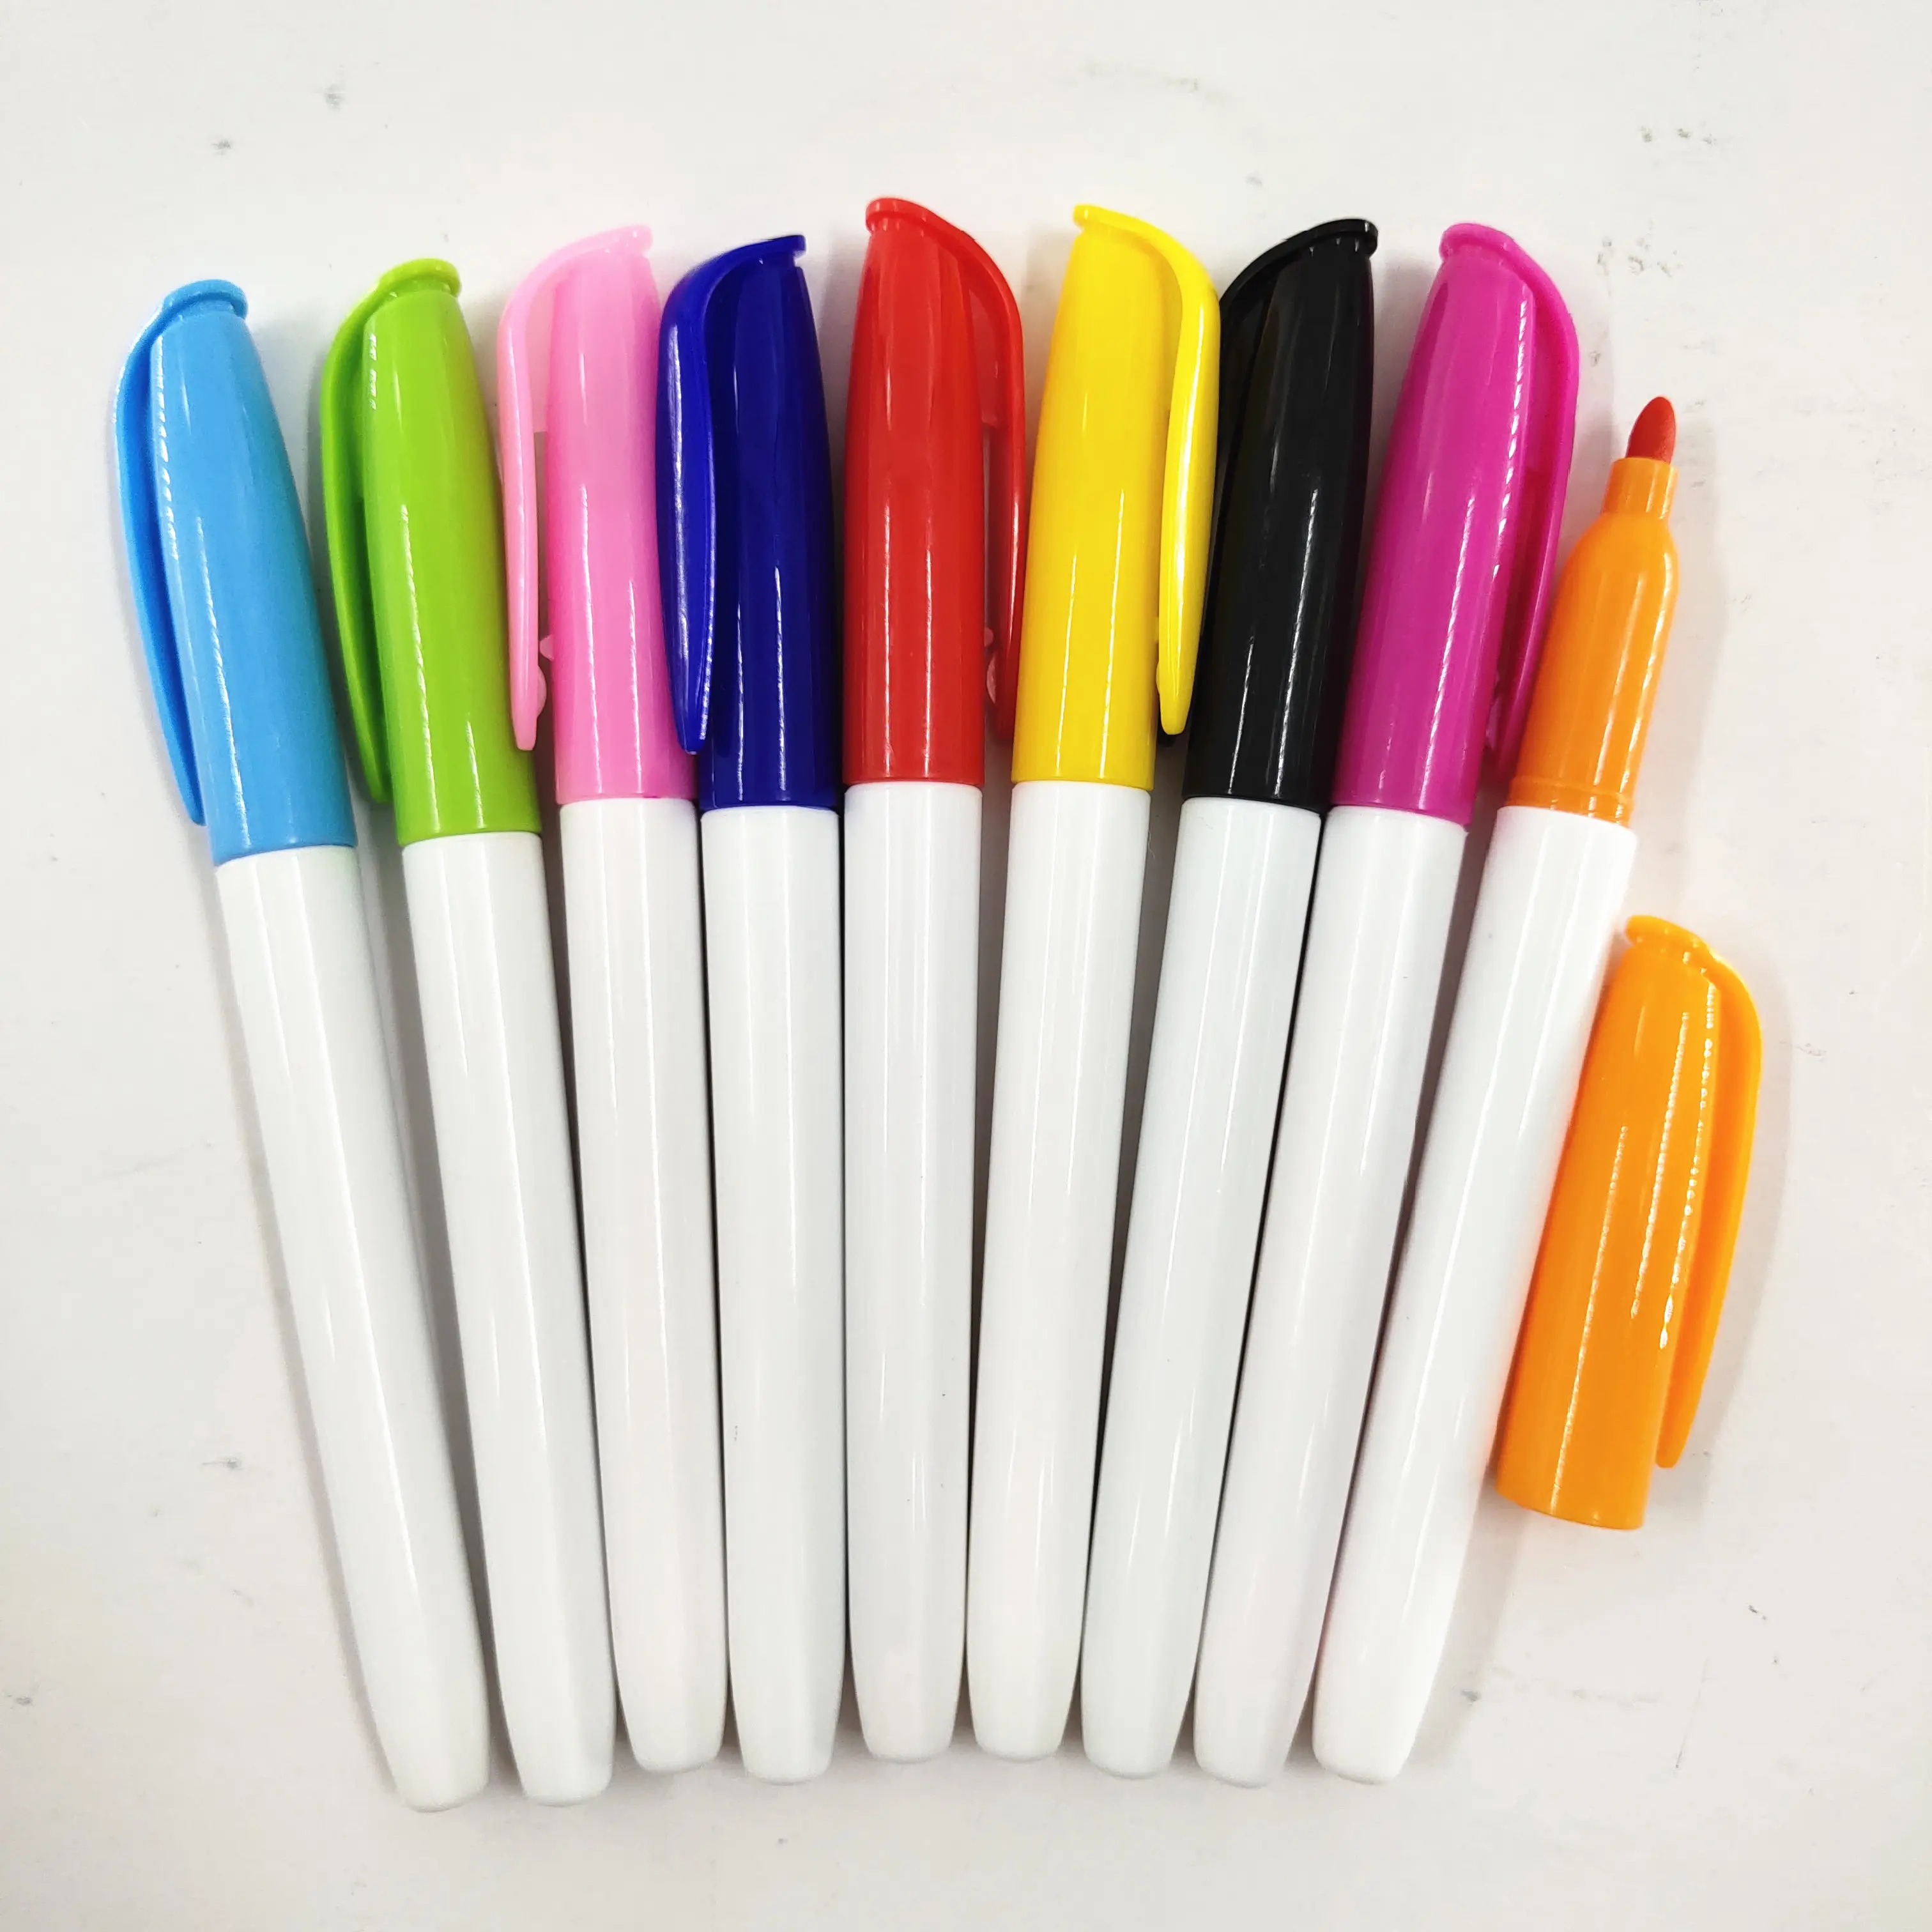 Fabric Markers Washable or Permanent Textile Pen Art Marker Sets